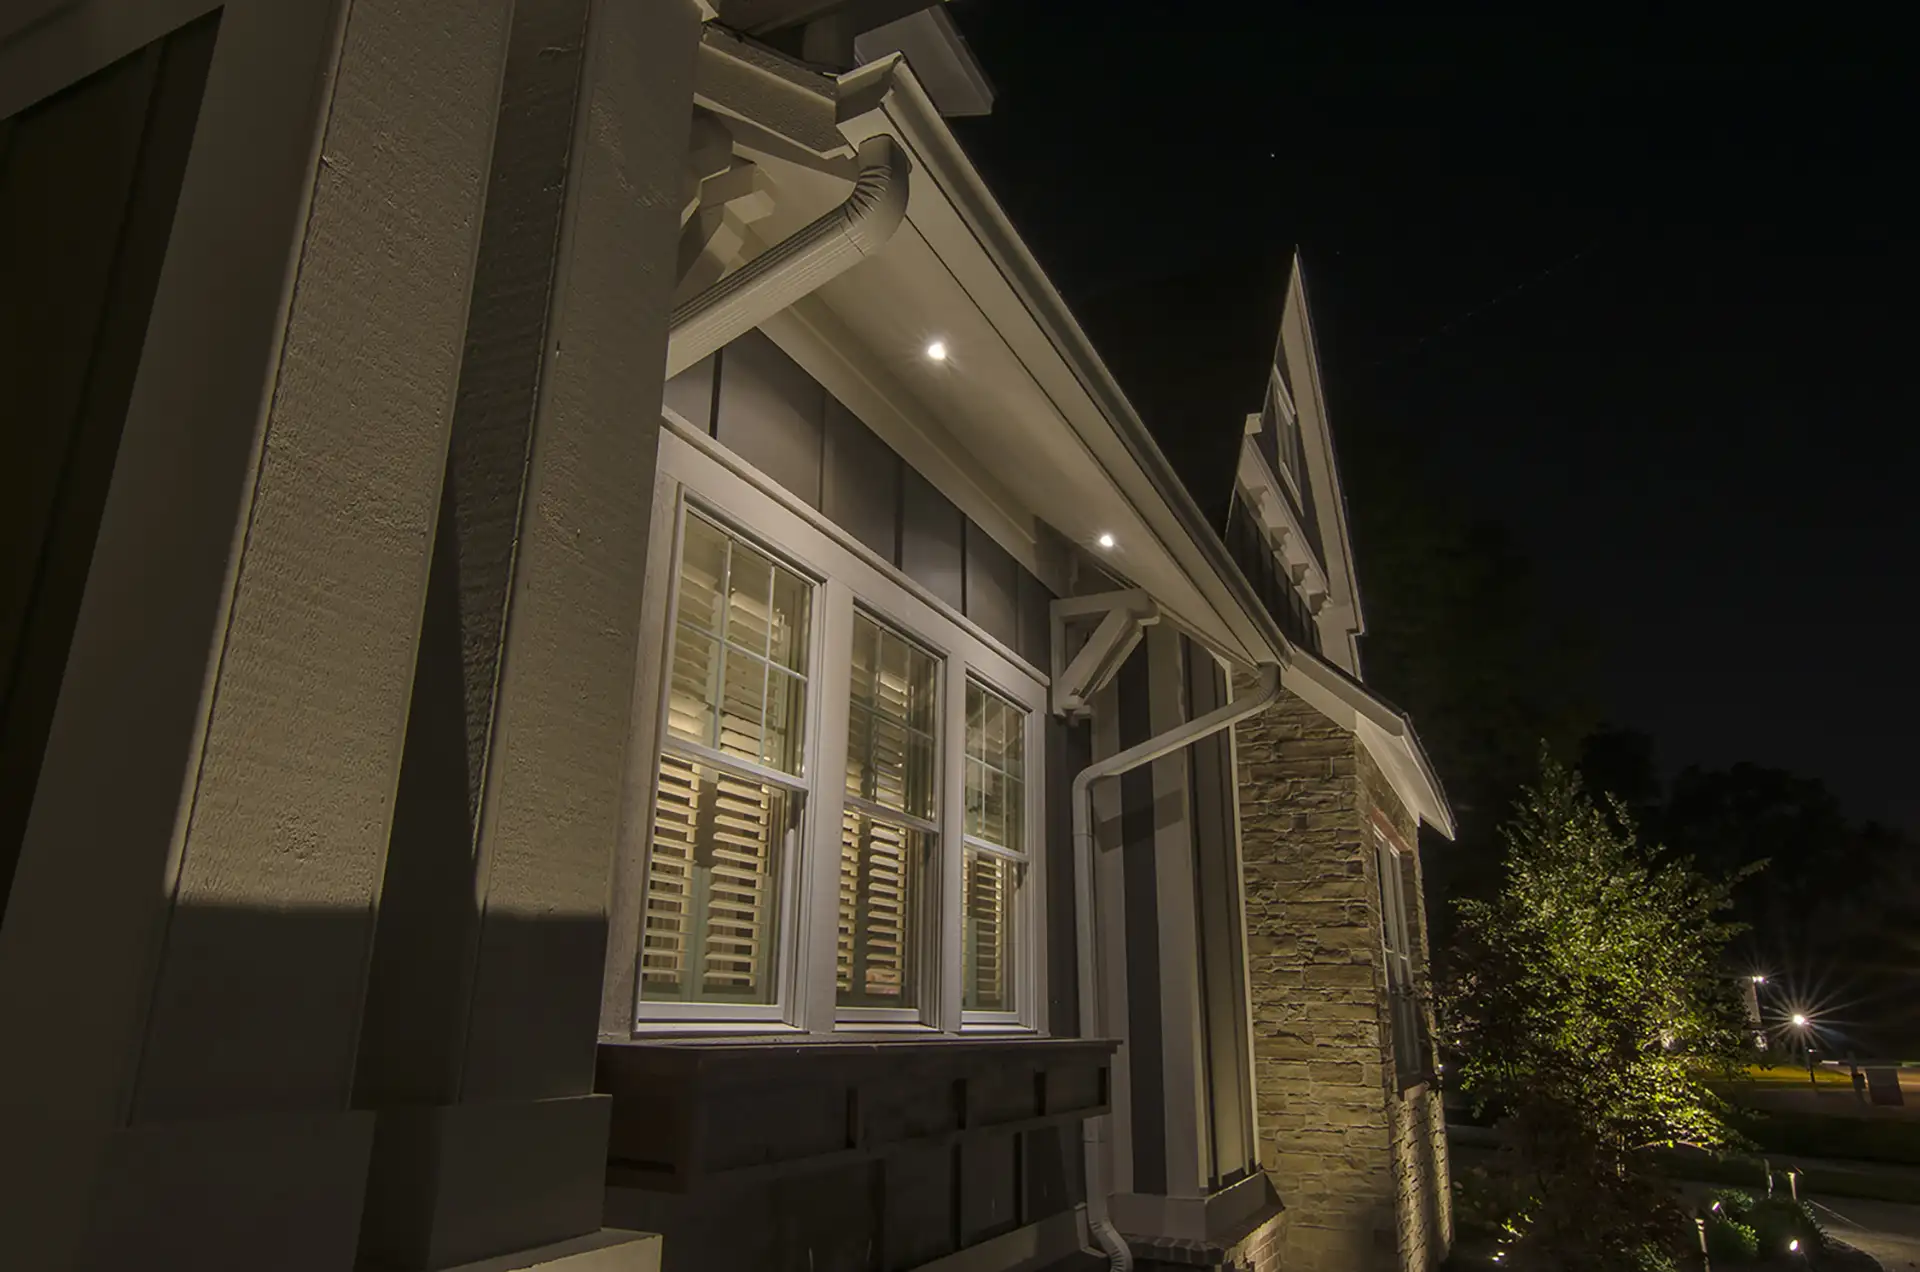 Walker residence image 2 micro cans Lighthouse Outdoor Lighting and Audio Northern Virginia Washington DC